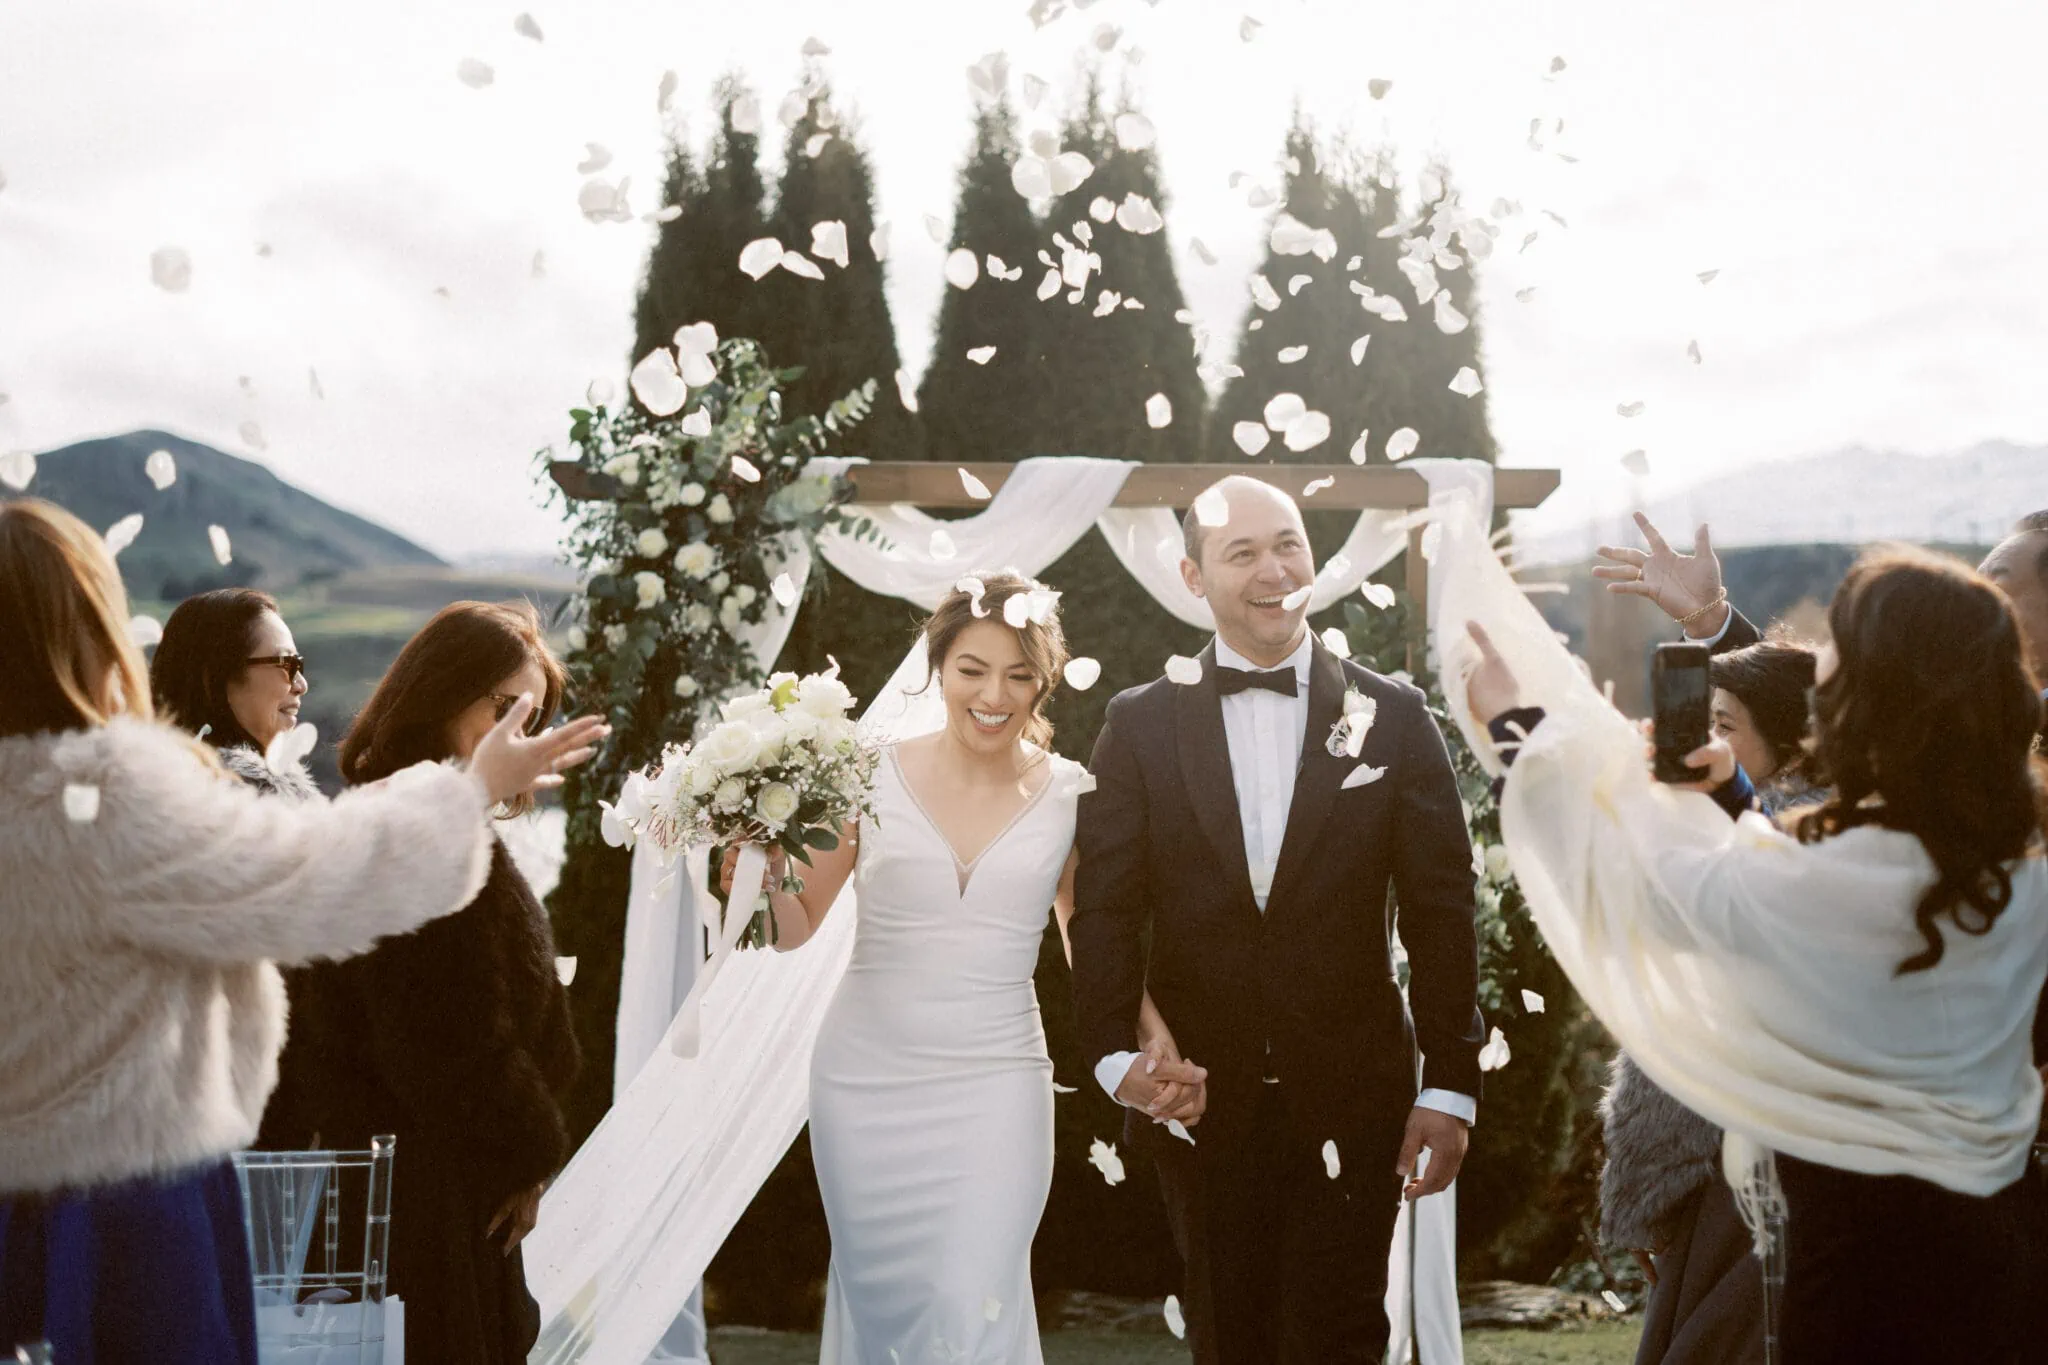 Queenstown New Zealand Elopement Wedding Photographer - Reyn and Justin celebrate their Stoneridge Estate Wedding with a joyous walk down the aisle, surrounded by confetti.